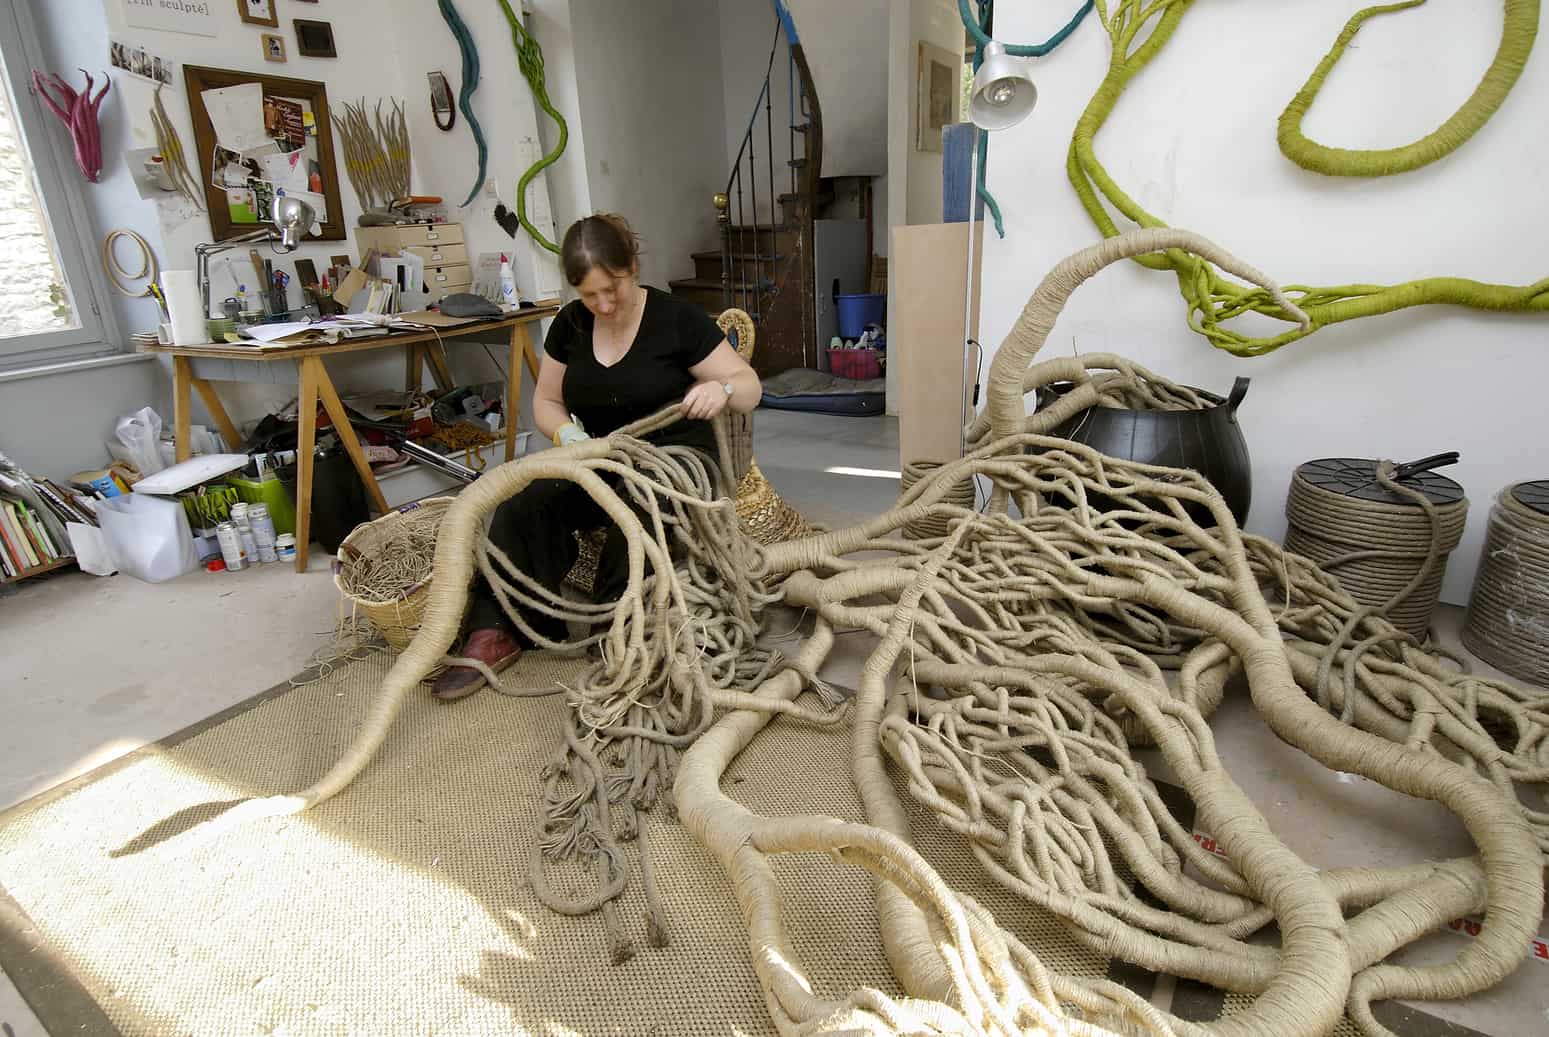 Aude Franjou at work sculpting a giant piece in her workshop